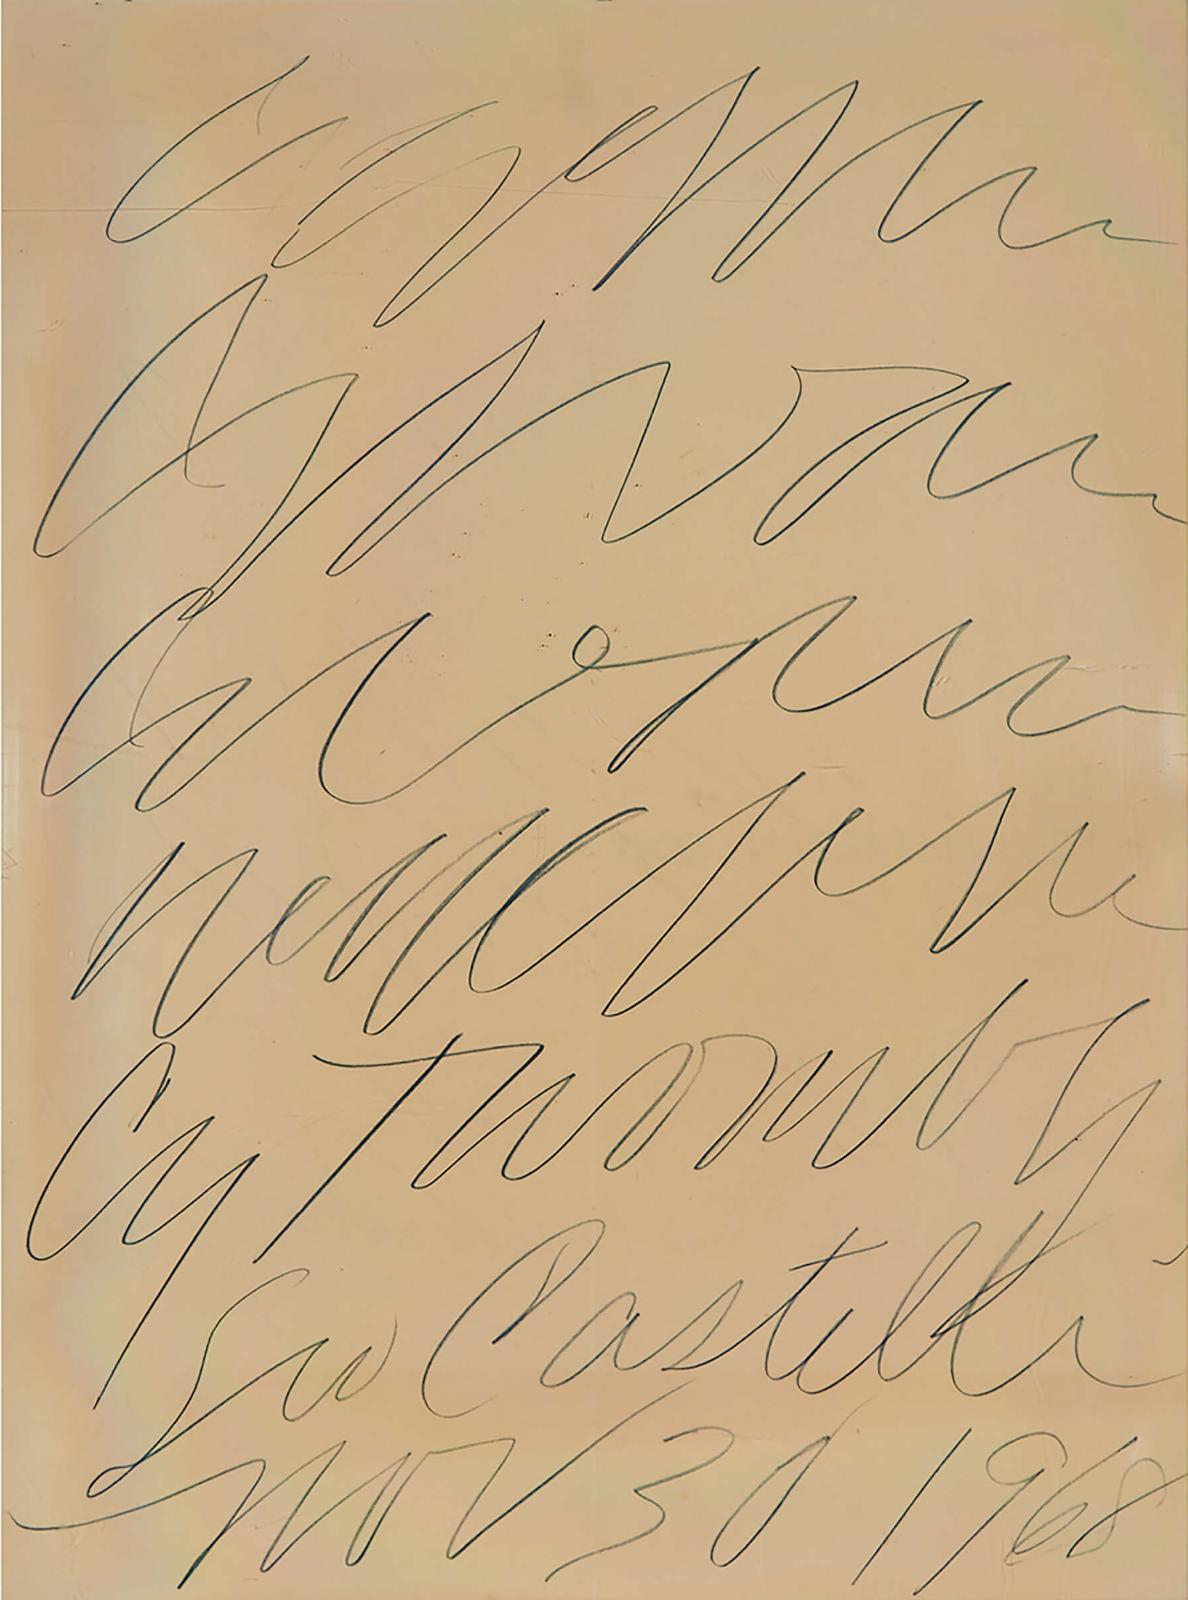 Cy Twombly (1928-2011) - Leo Castelli Exhibition Poster, 1968